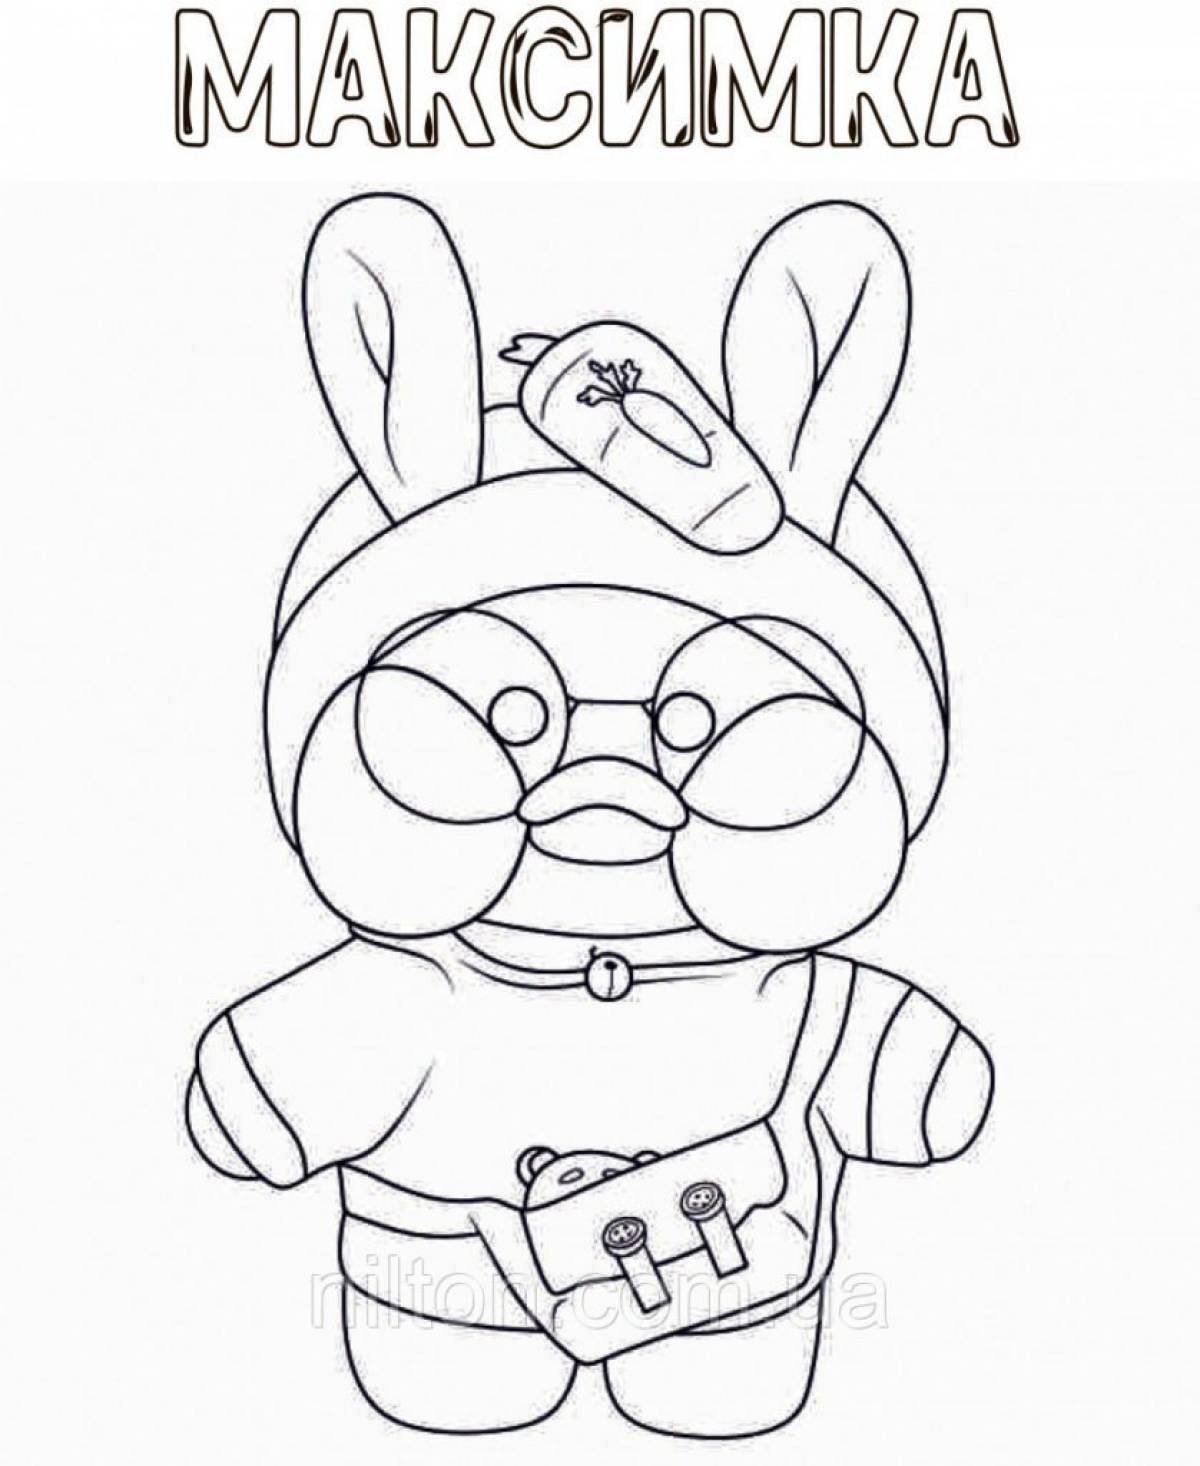 Lalofan's amazing coloring page